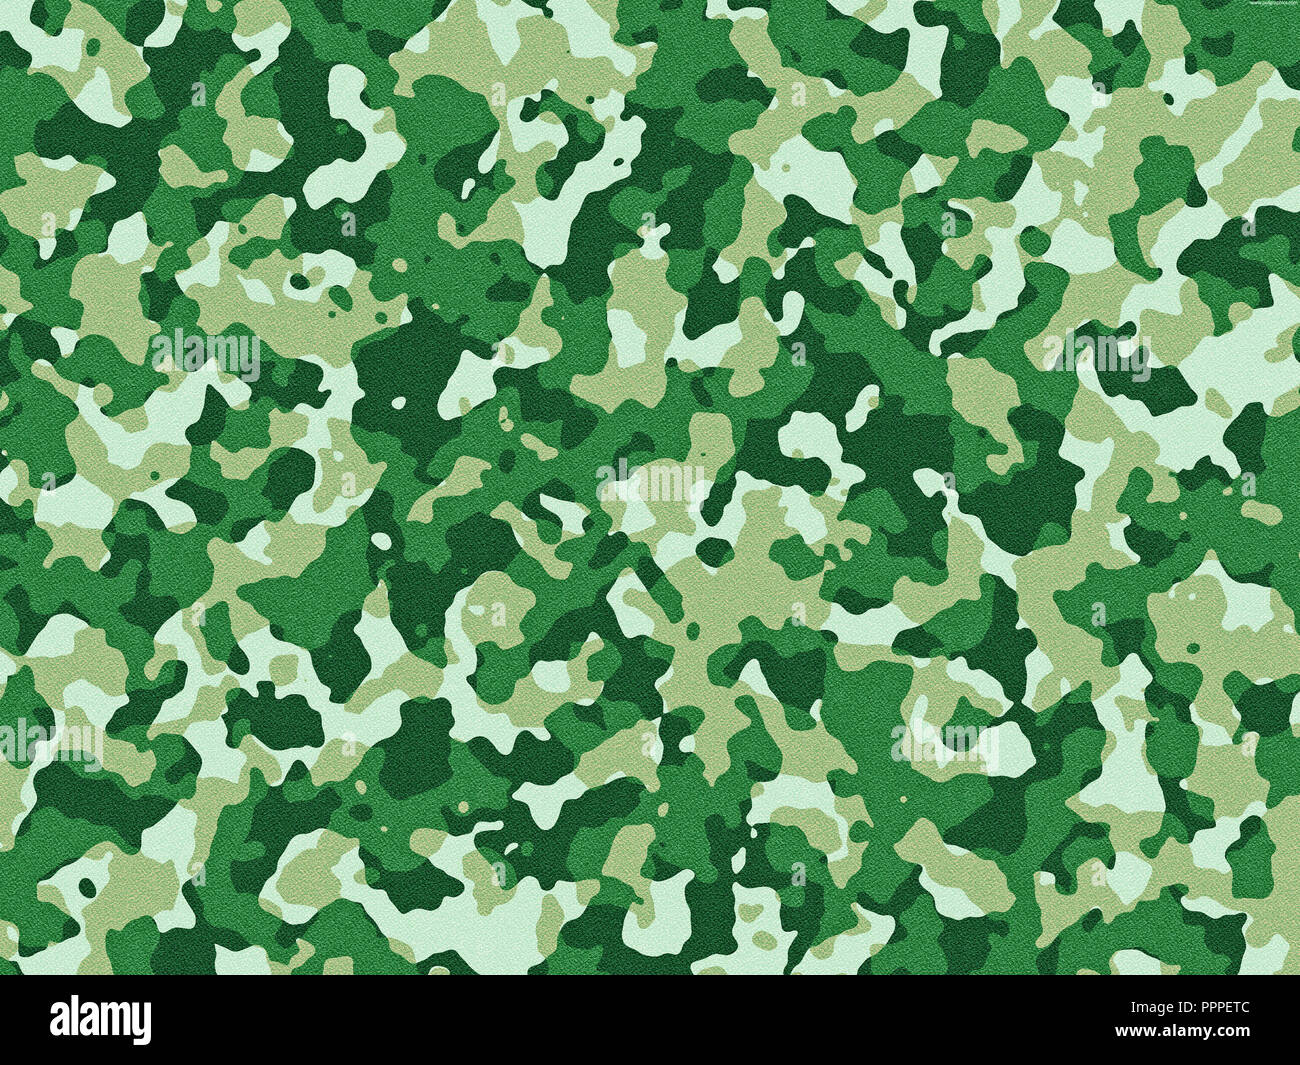 Textured green camouflage pattern background Stock Photo